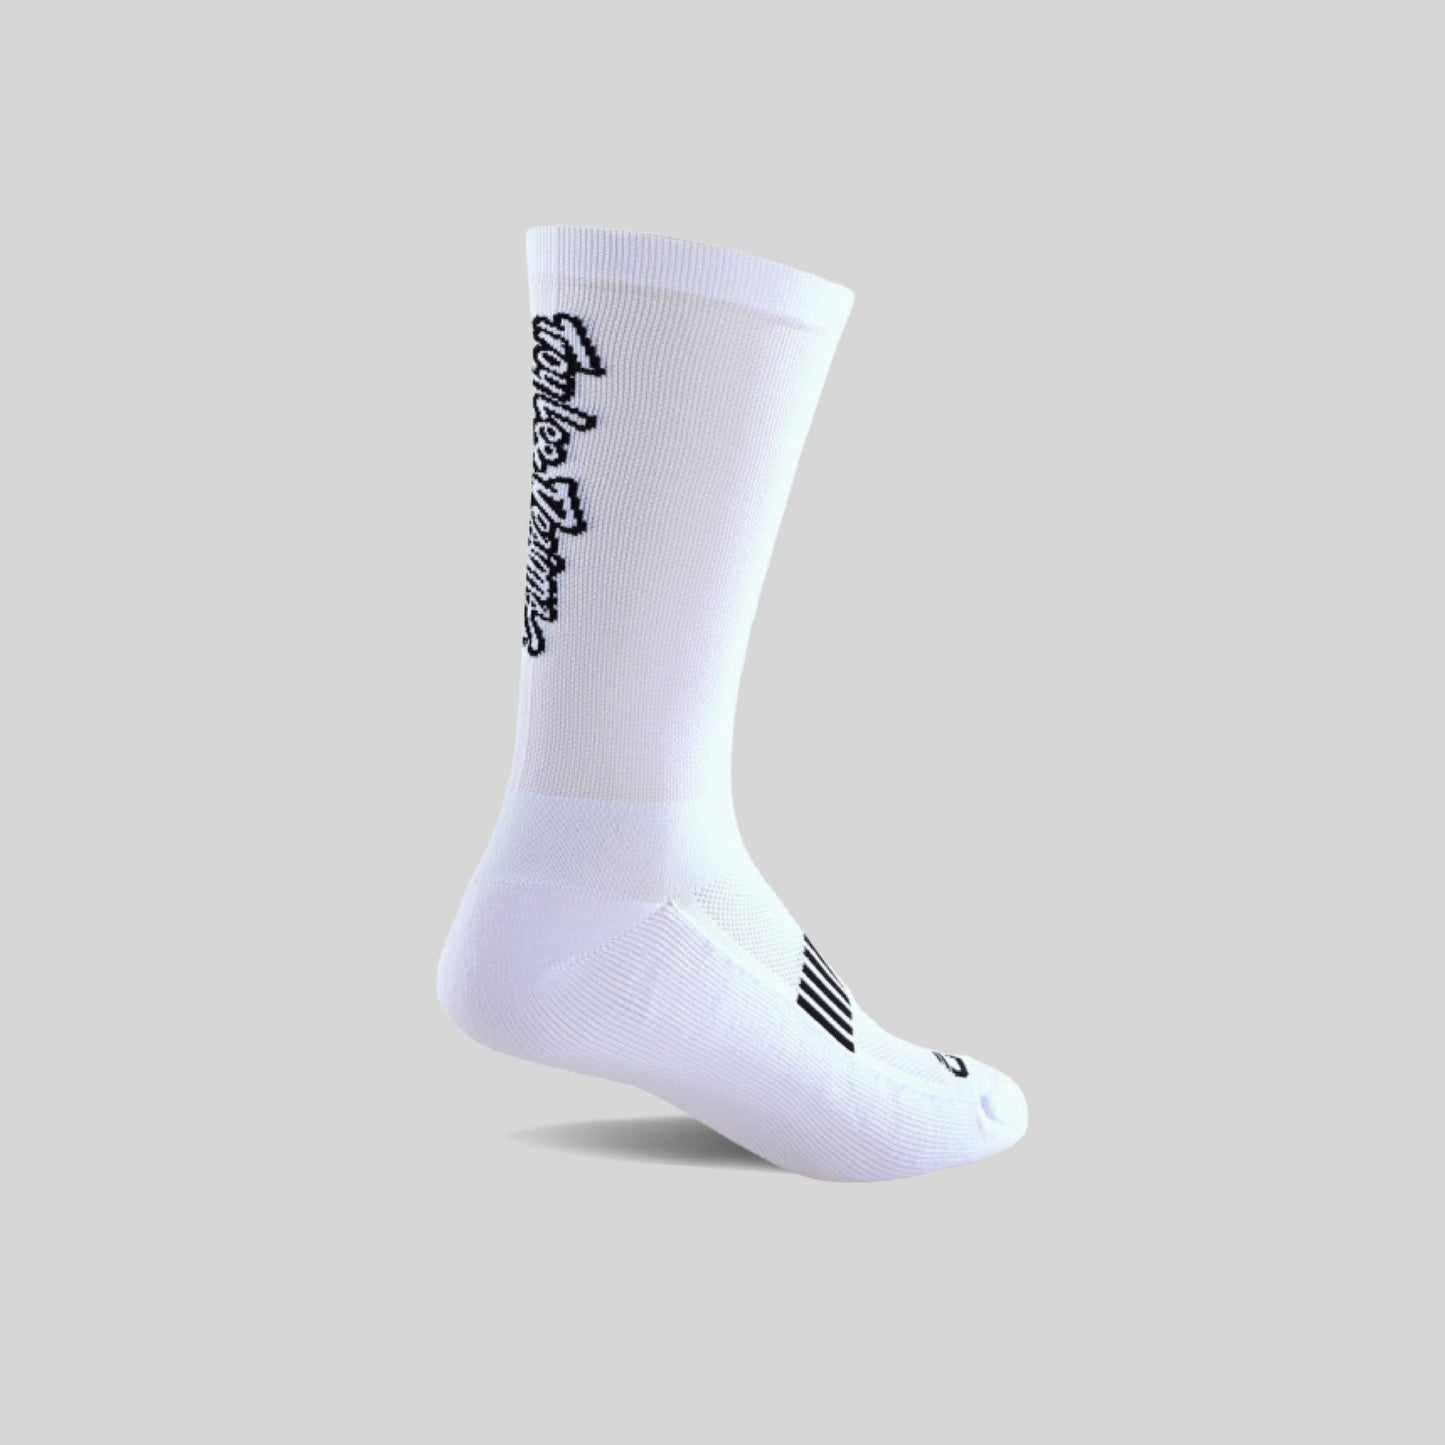 Troy Lee Designs Performance Signature Socks White from Ascender Cycling Club Zürich Switzerland Right Side View